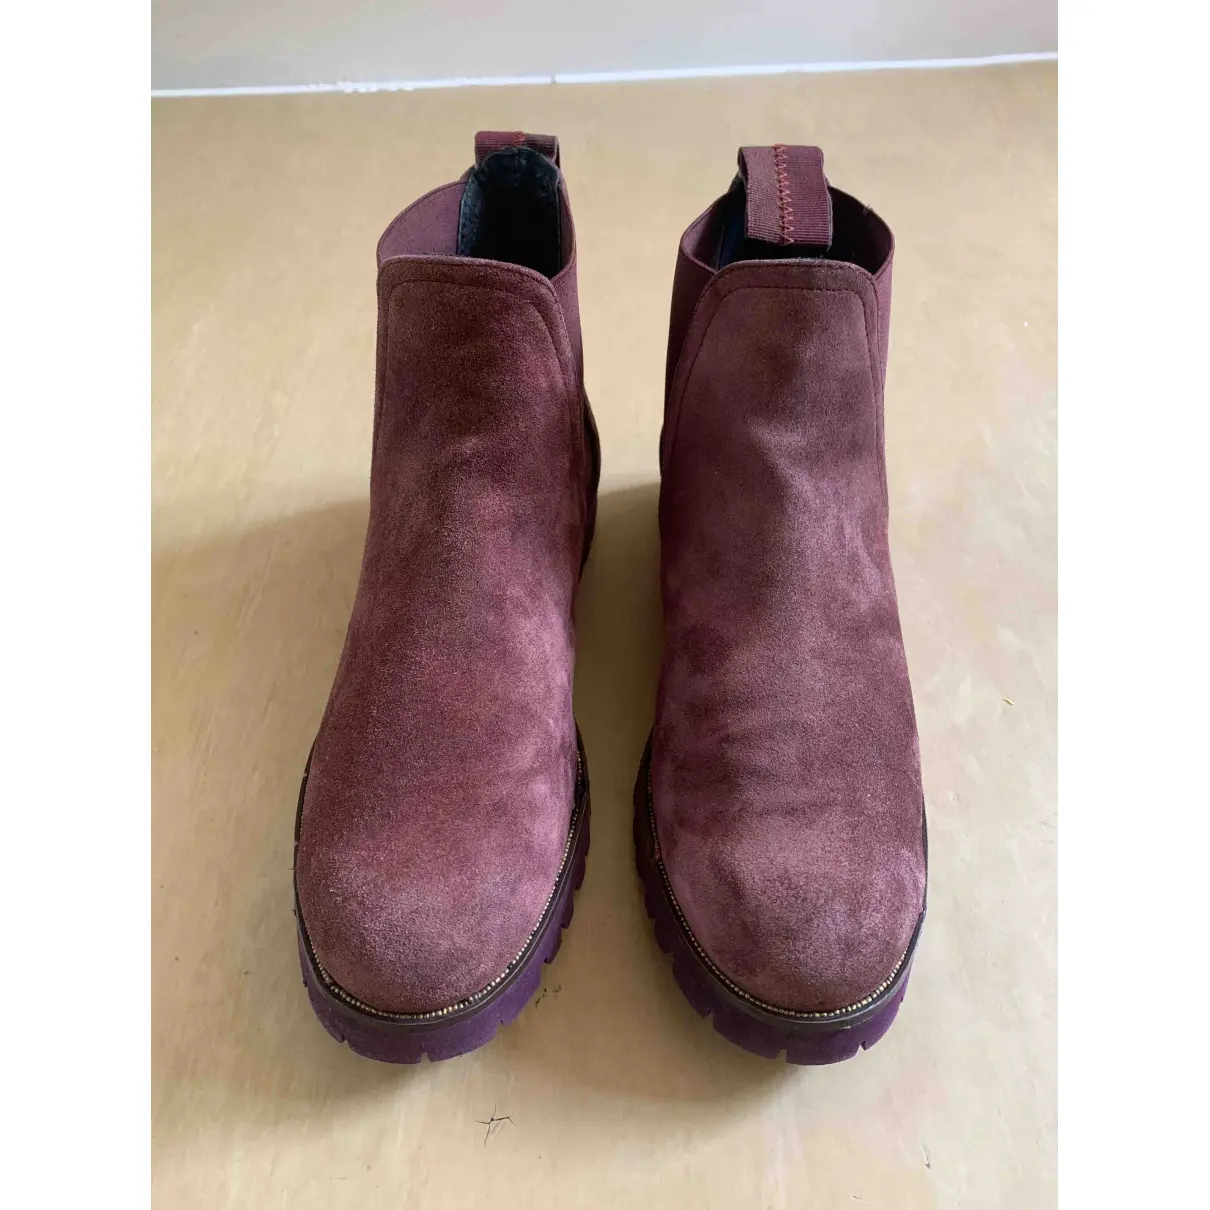 Buy Maliparmi Leather boots online